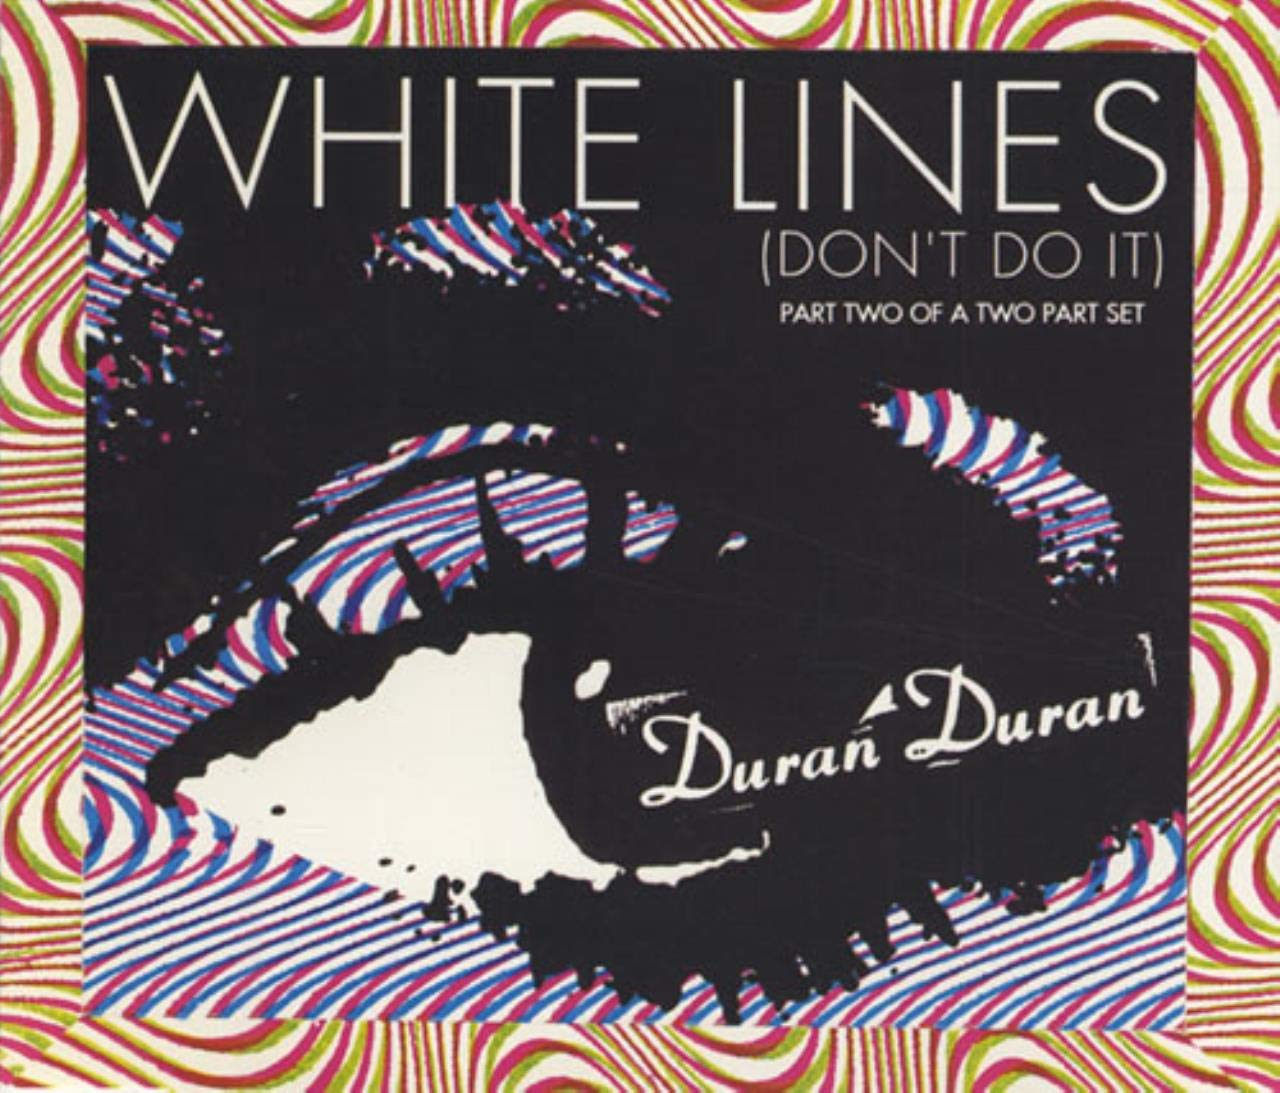 Art for White Lines (Don't Do It) (Clean) by Duran Duran ft Grandmaster Flash, Melle Mel & The Furious Five